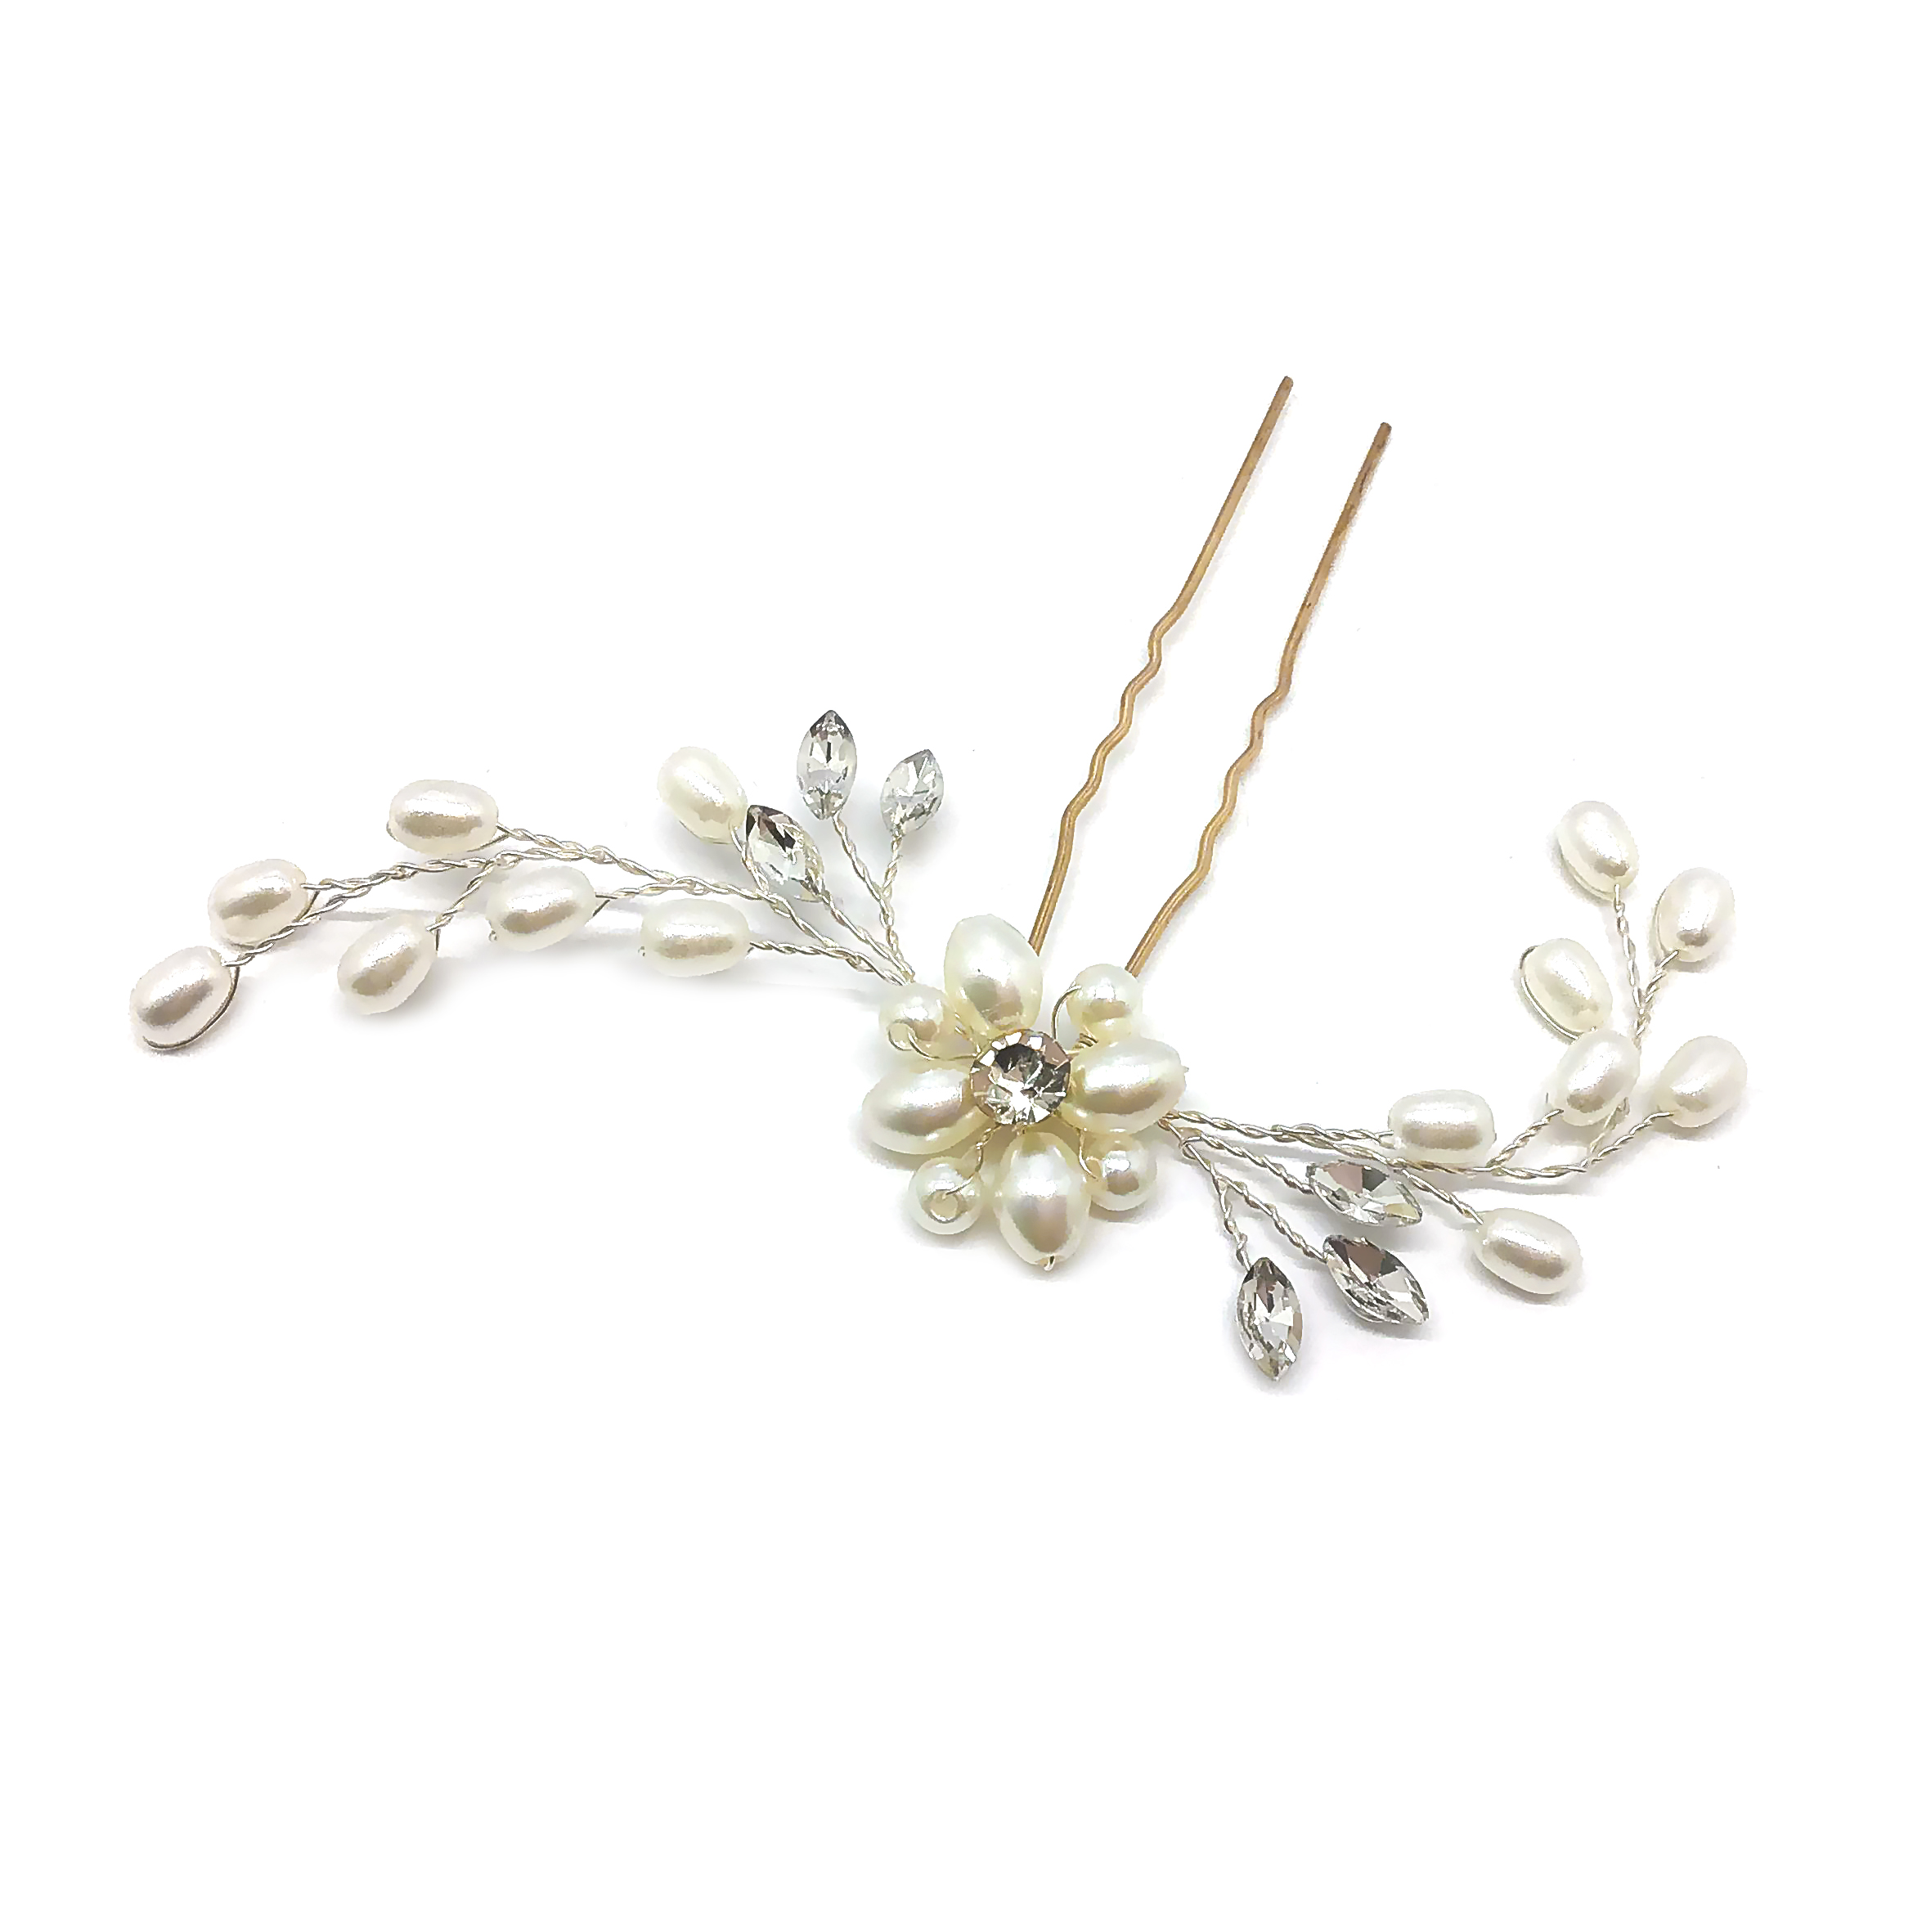 Bridal Hair Pin with flower and pearl